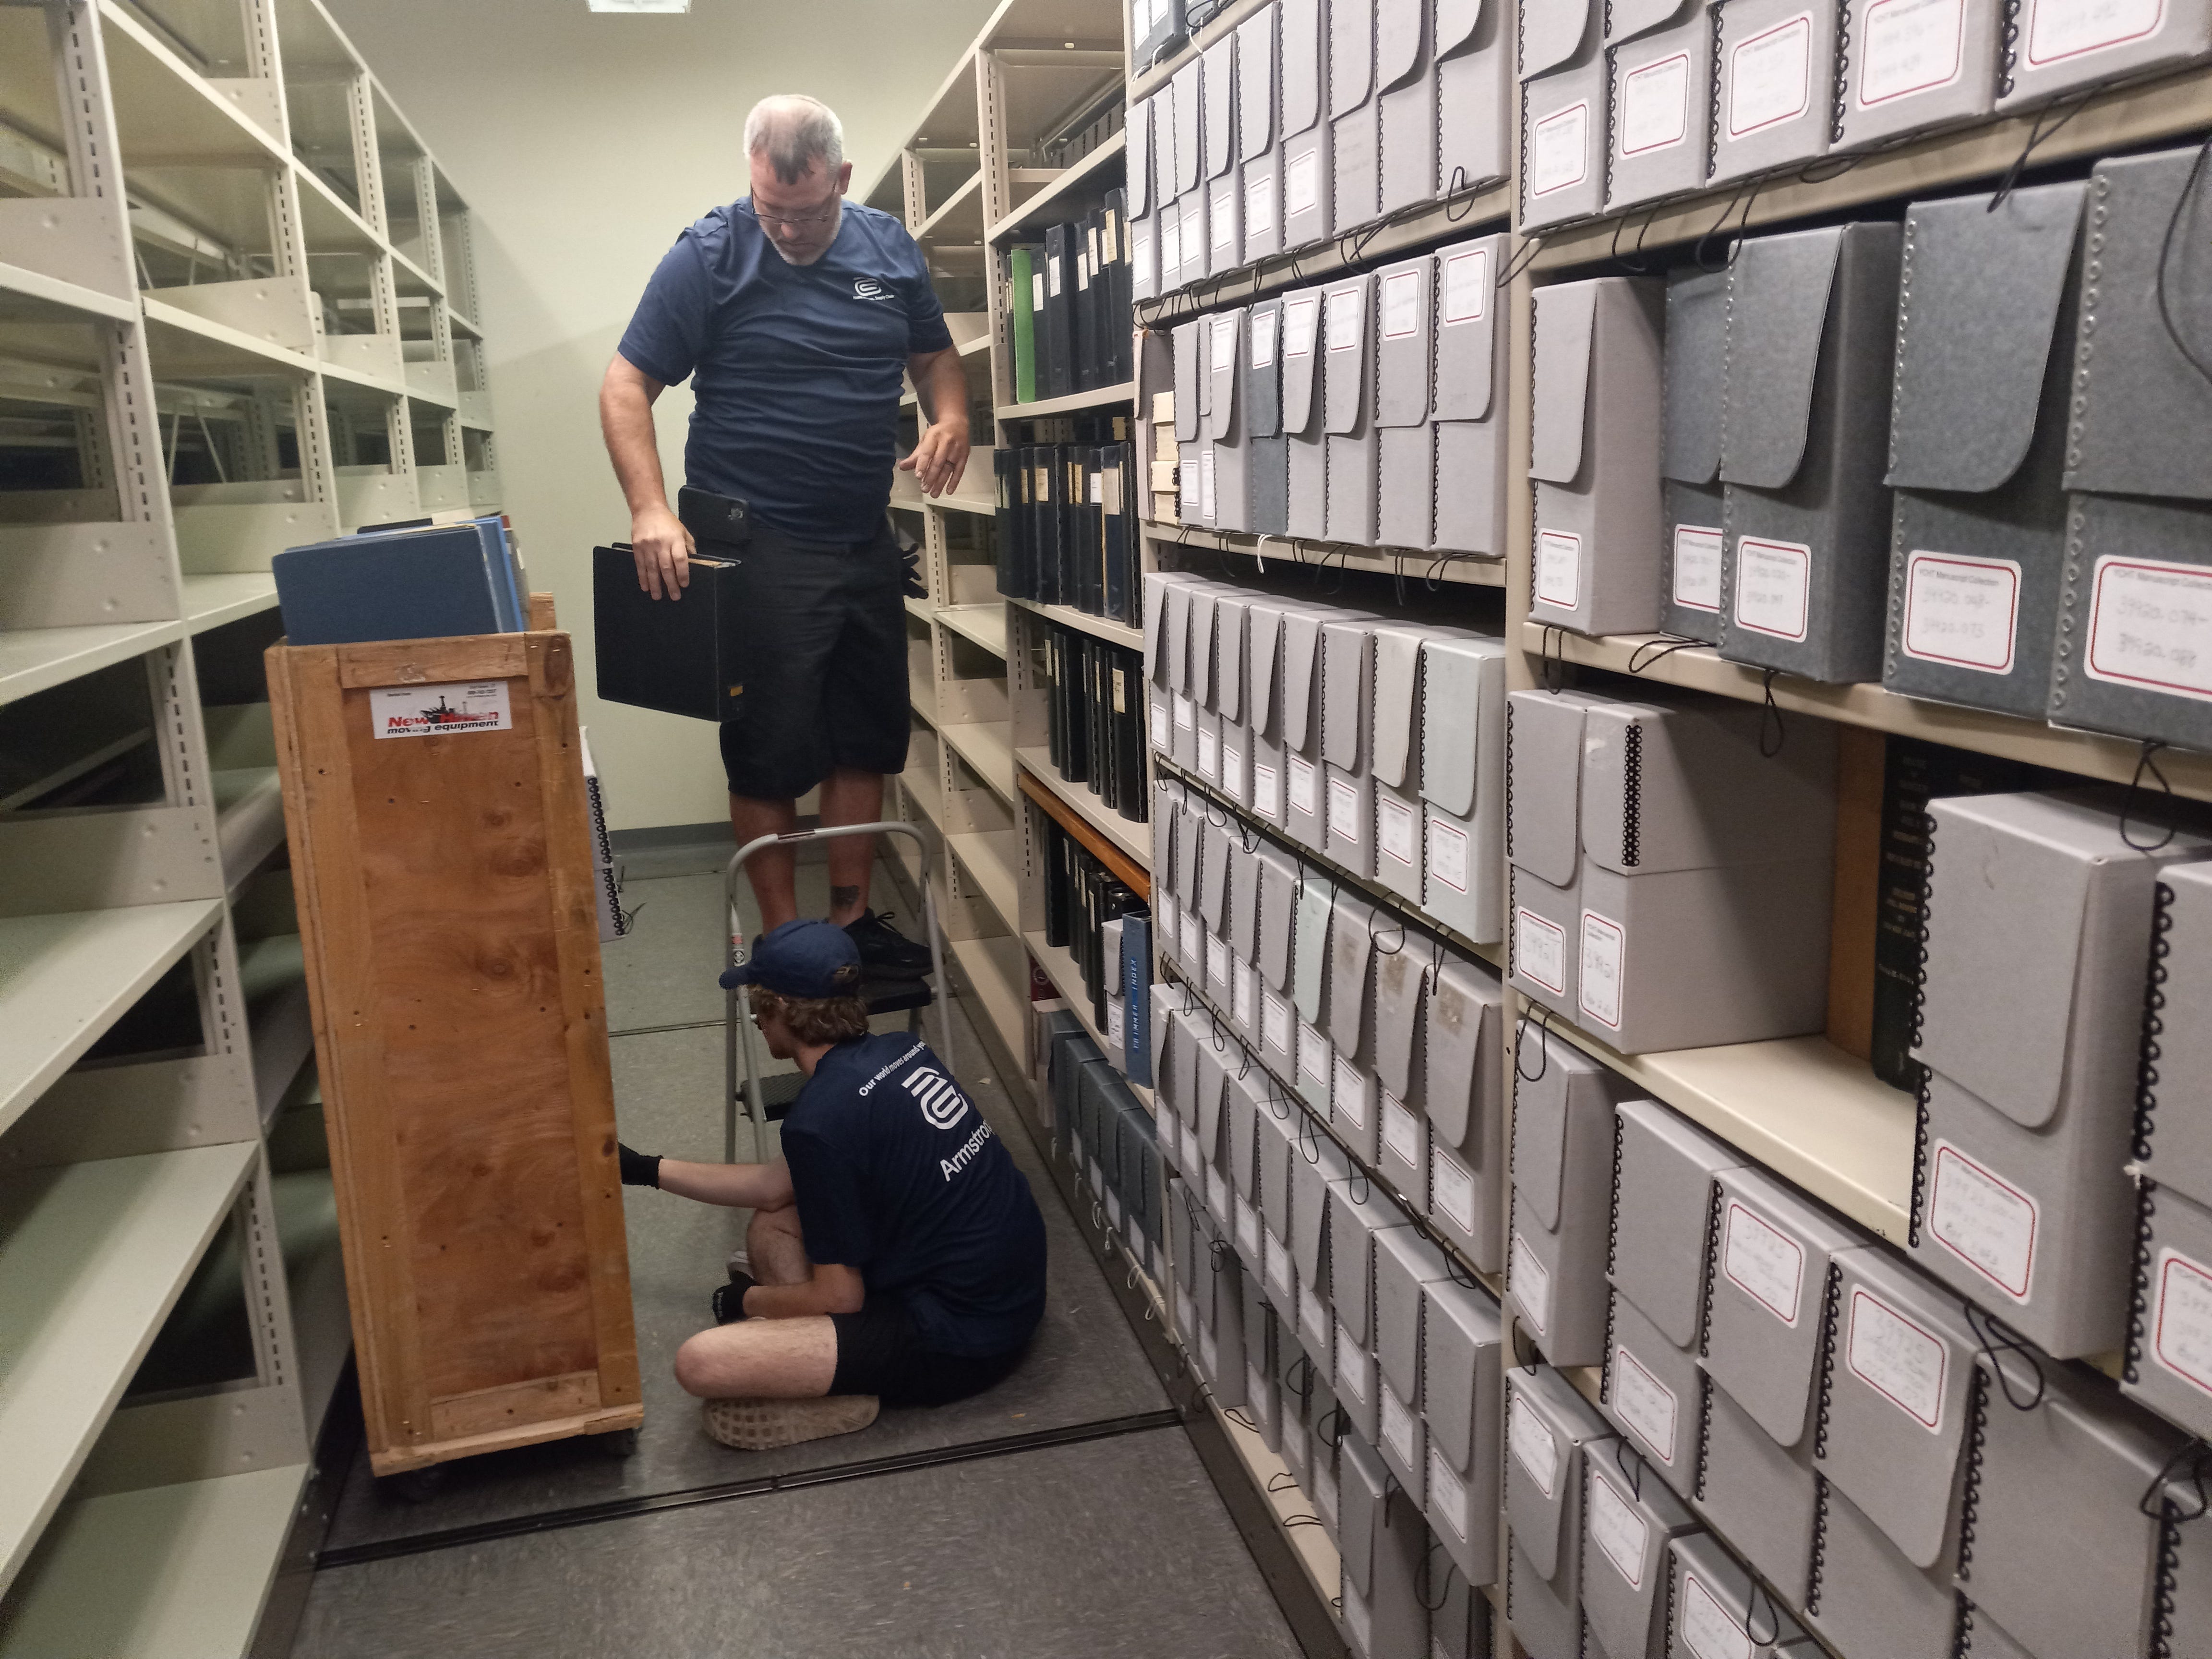 Workers take down archived material from a shelf at the old York County History Center on East Market Street in York City. The move of all the archived material should be completed by next week.